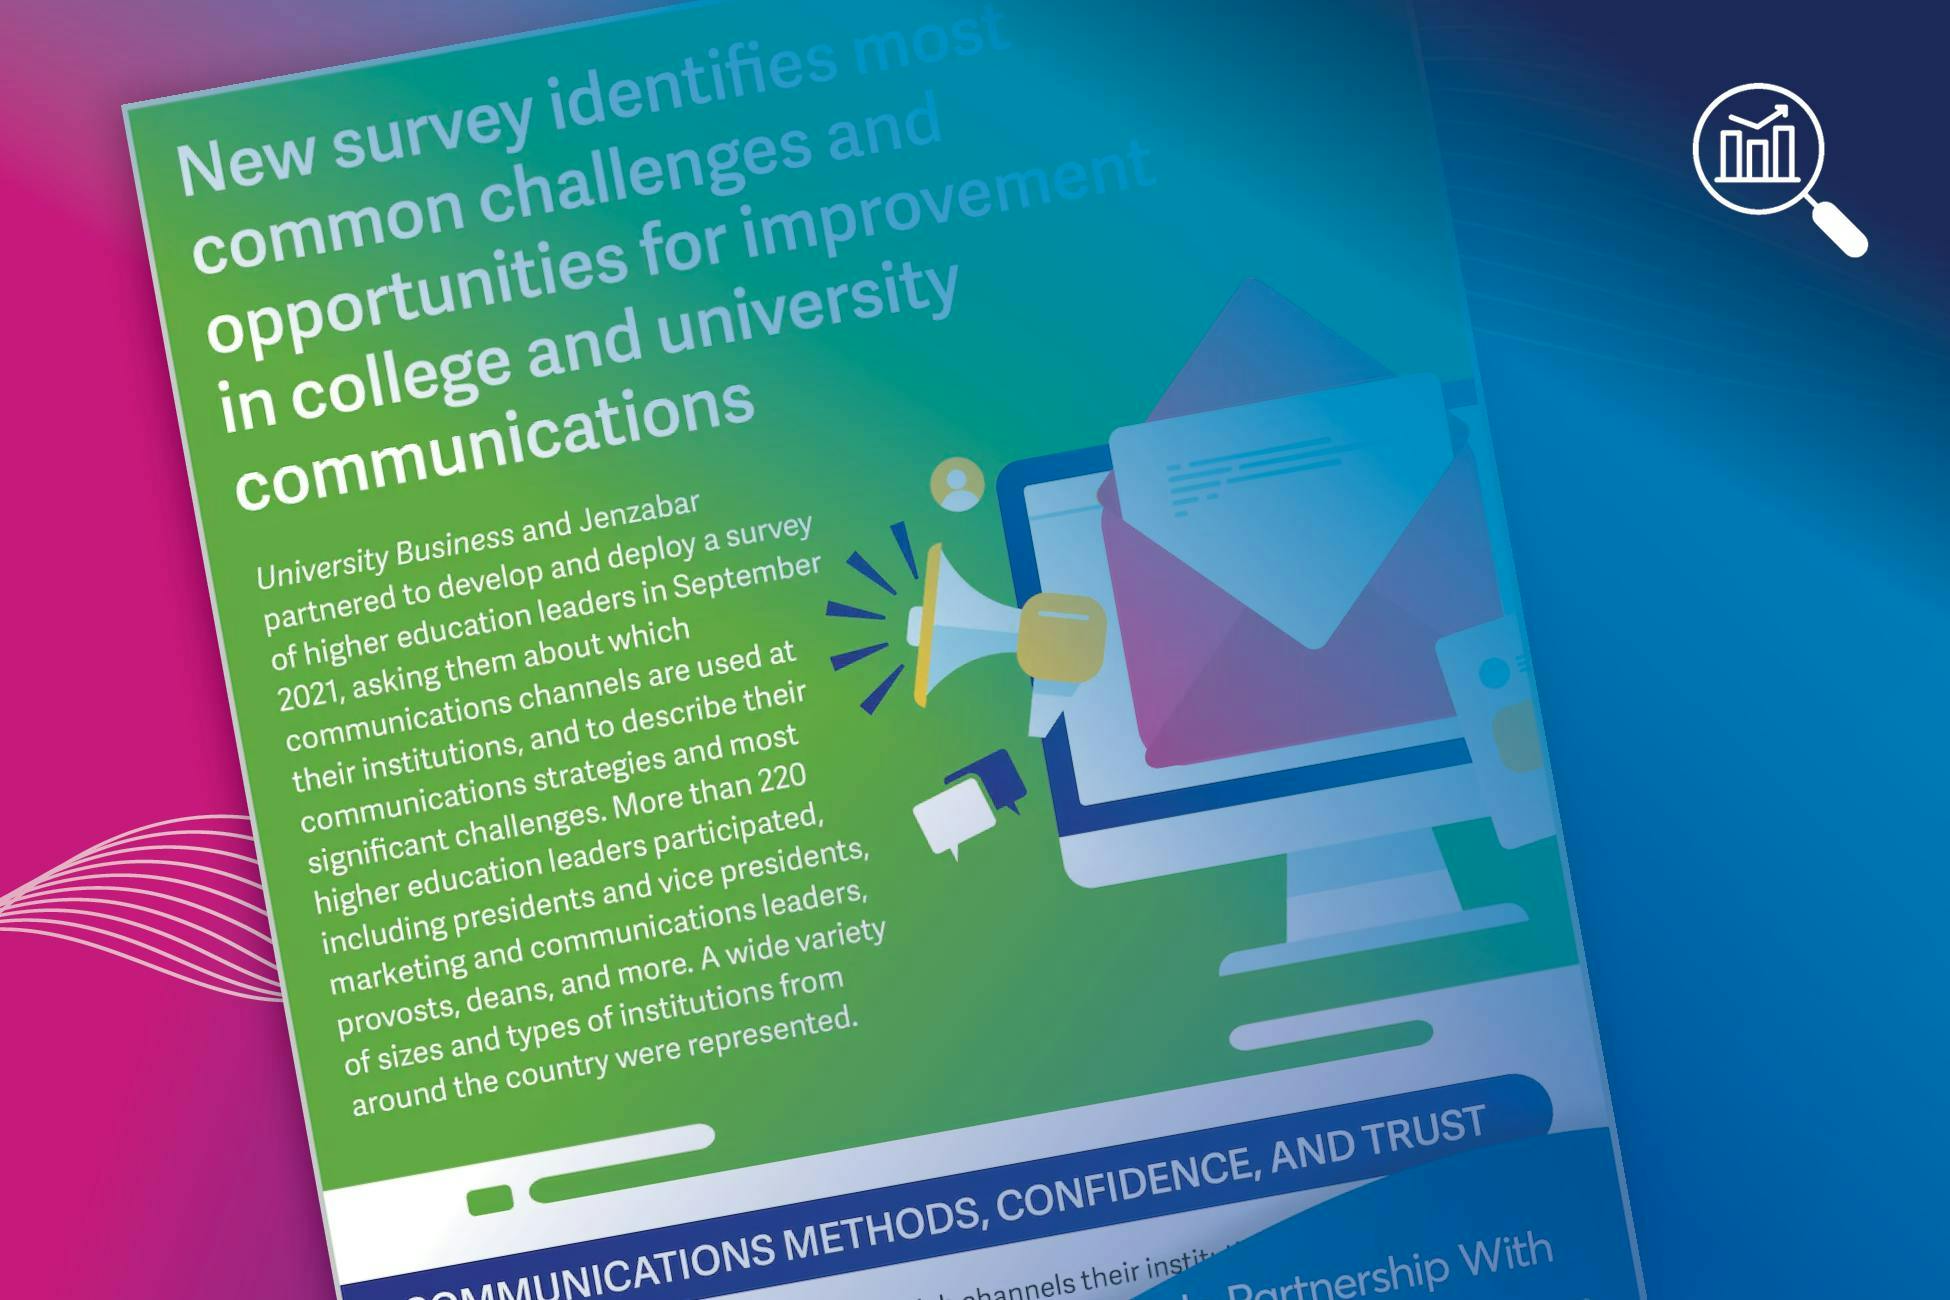 Industry Insight: Survey Identifies Most Common Challenges and Opportunities for Improvement in College and University Communications